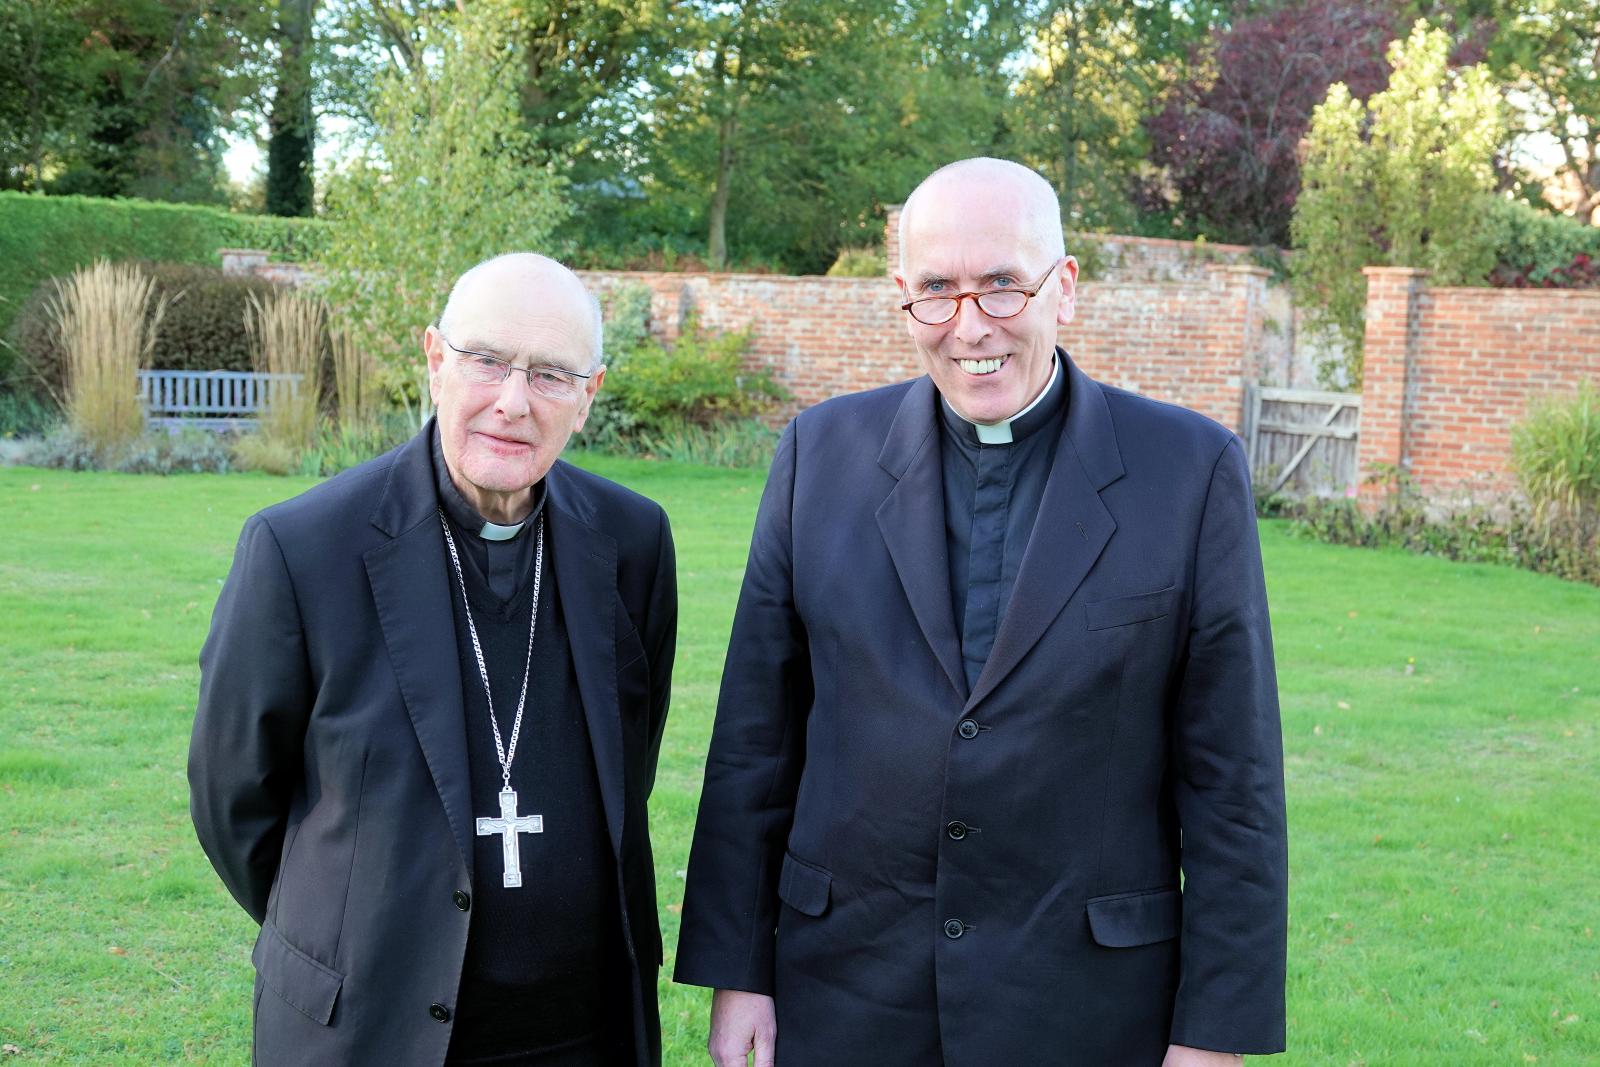 Cardinal welcomes appointment of new Bishop for East Anglia